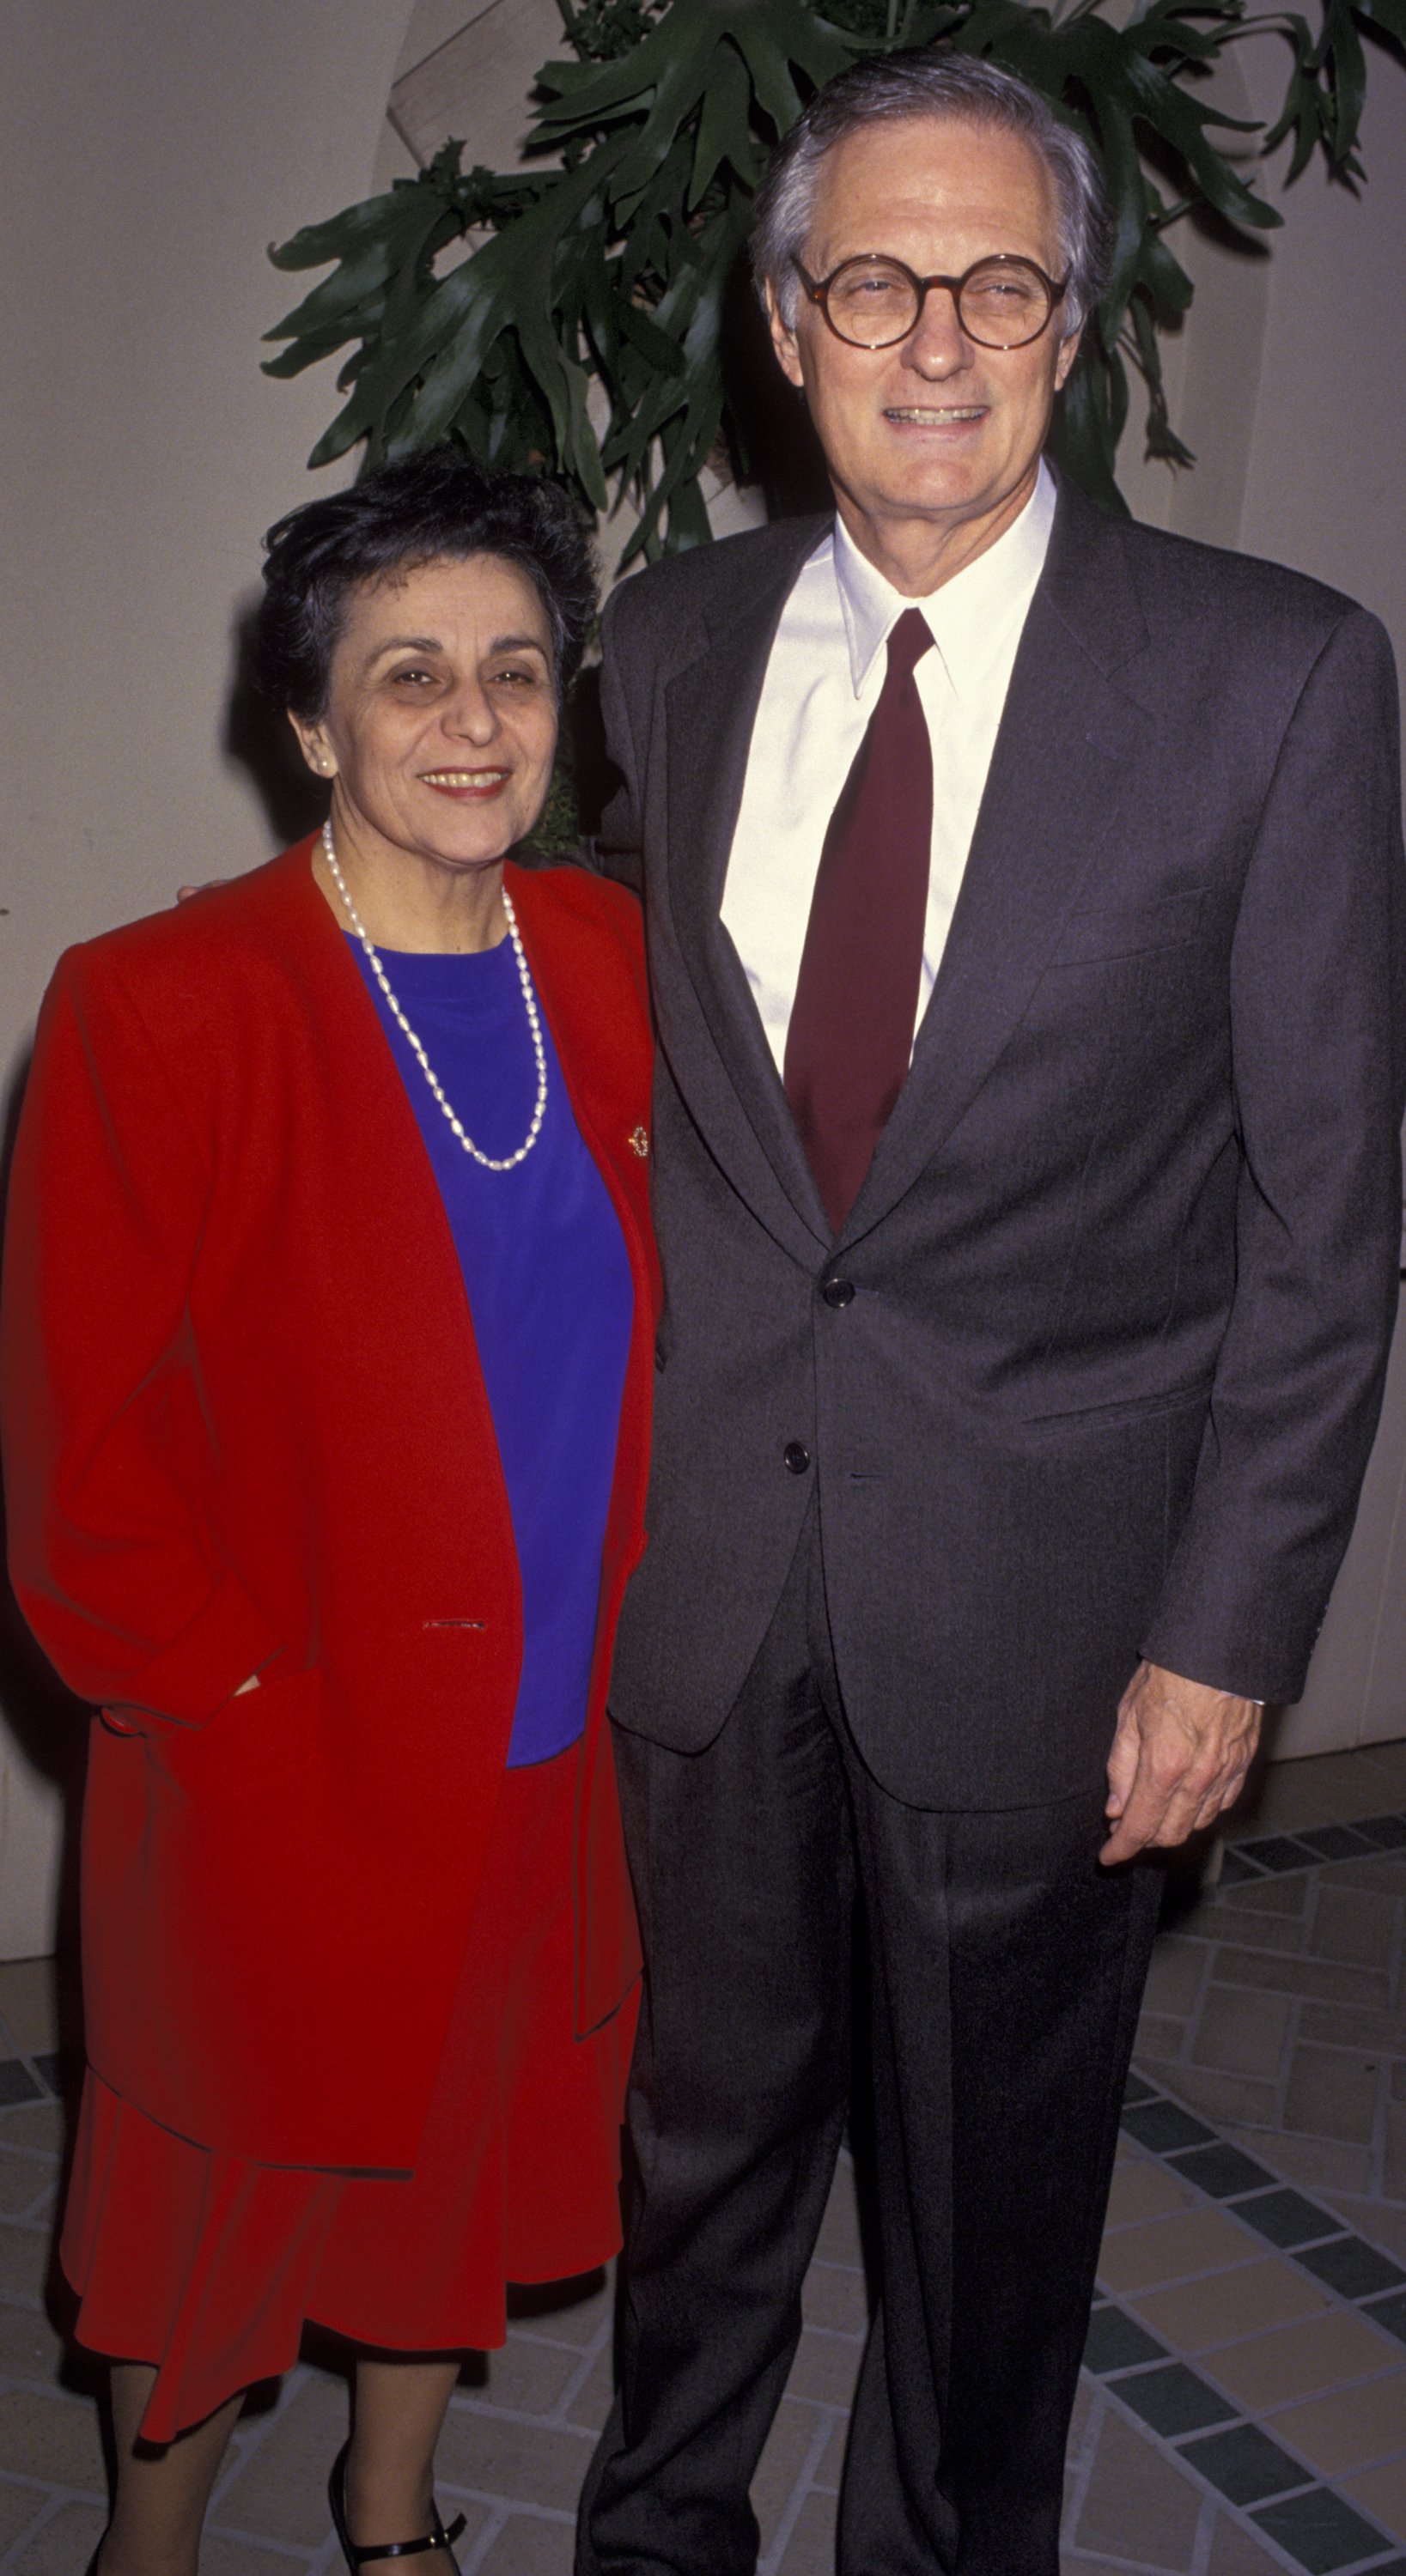 Alan Alda and Arlene Weiss attending the 11th Annual Museum of Television and Radio Cocktail Party at the Four Seasons Hotel on February 28, 1994 in Beverly Hills, California | Source: Getty Images